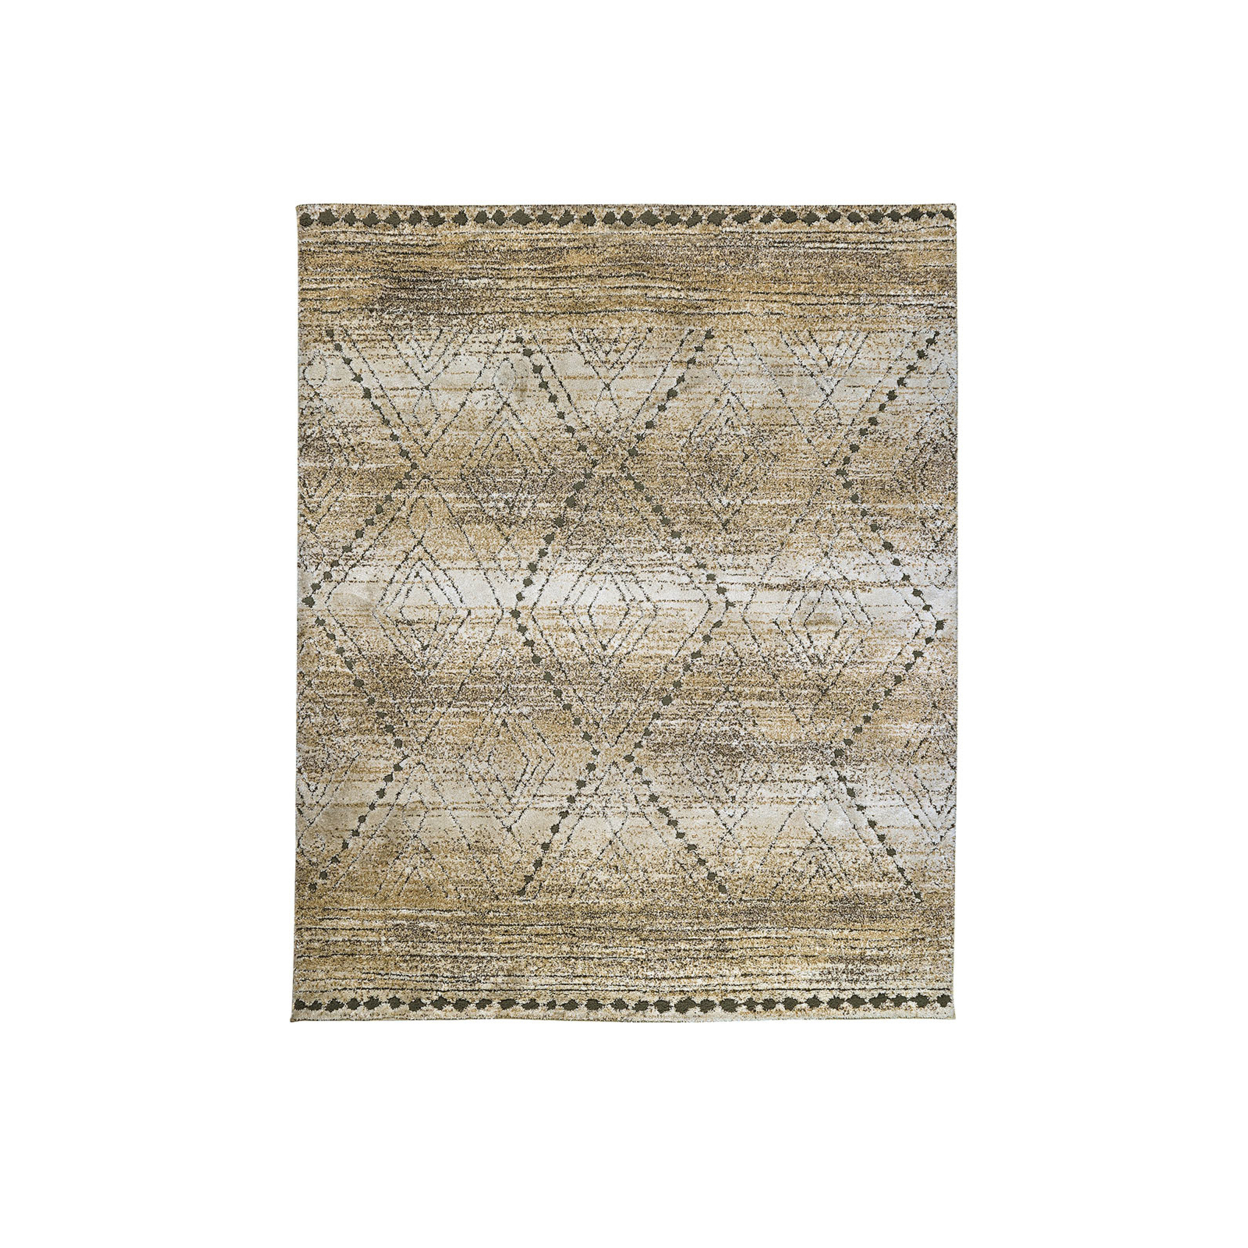 Recycled Polyester Area Rug With Geometric Pattern, Gray And Beige- Saltoro Sherpi